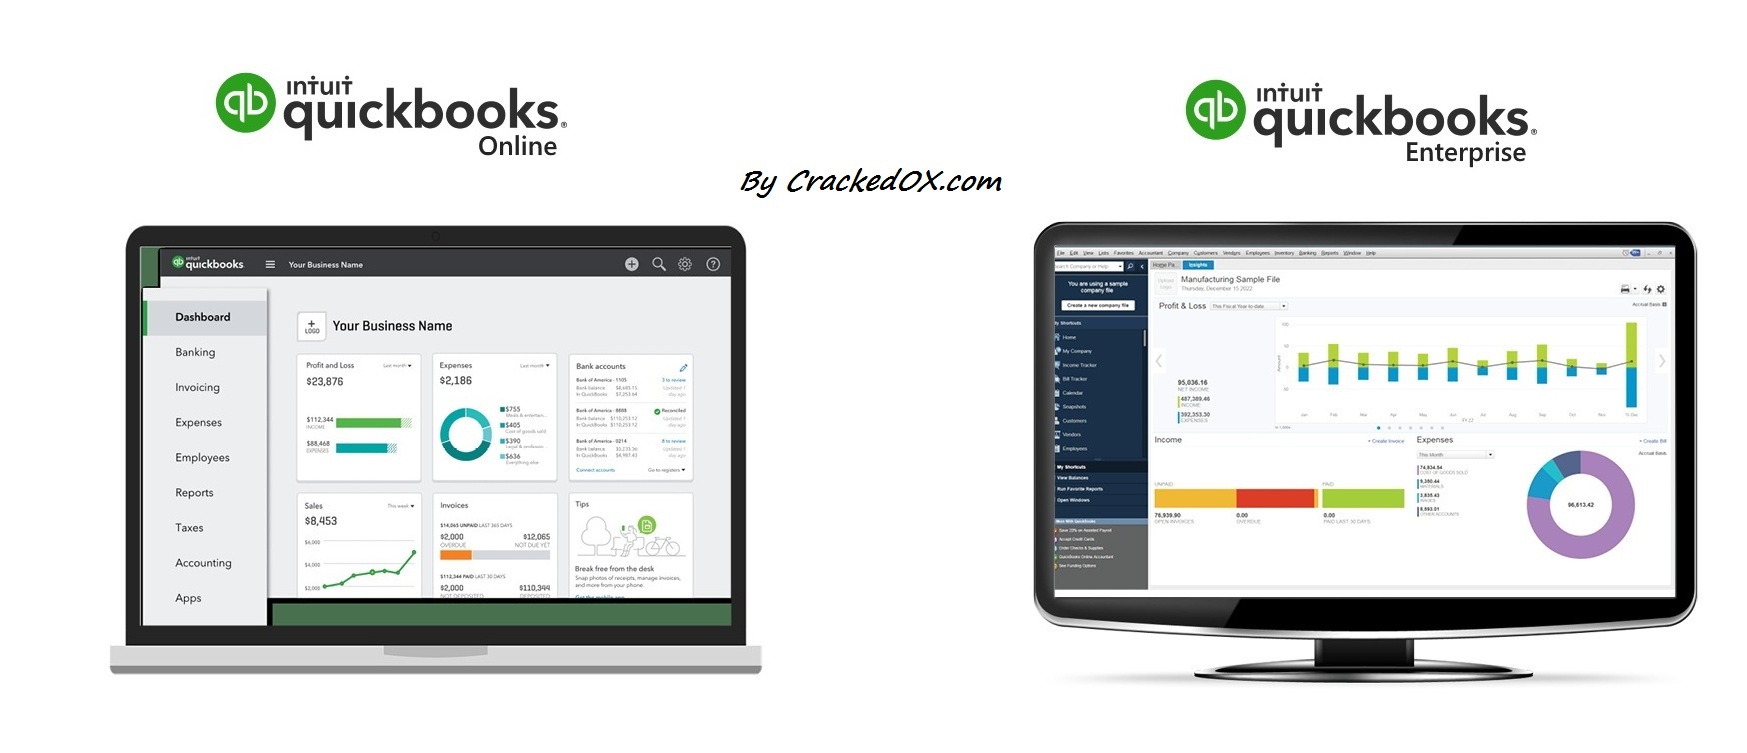 quickbooks license and product number keygen